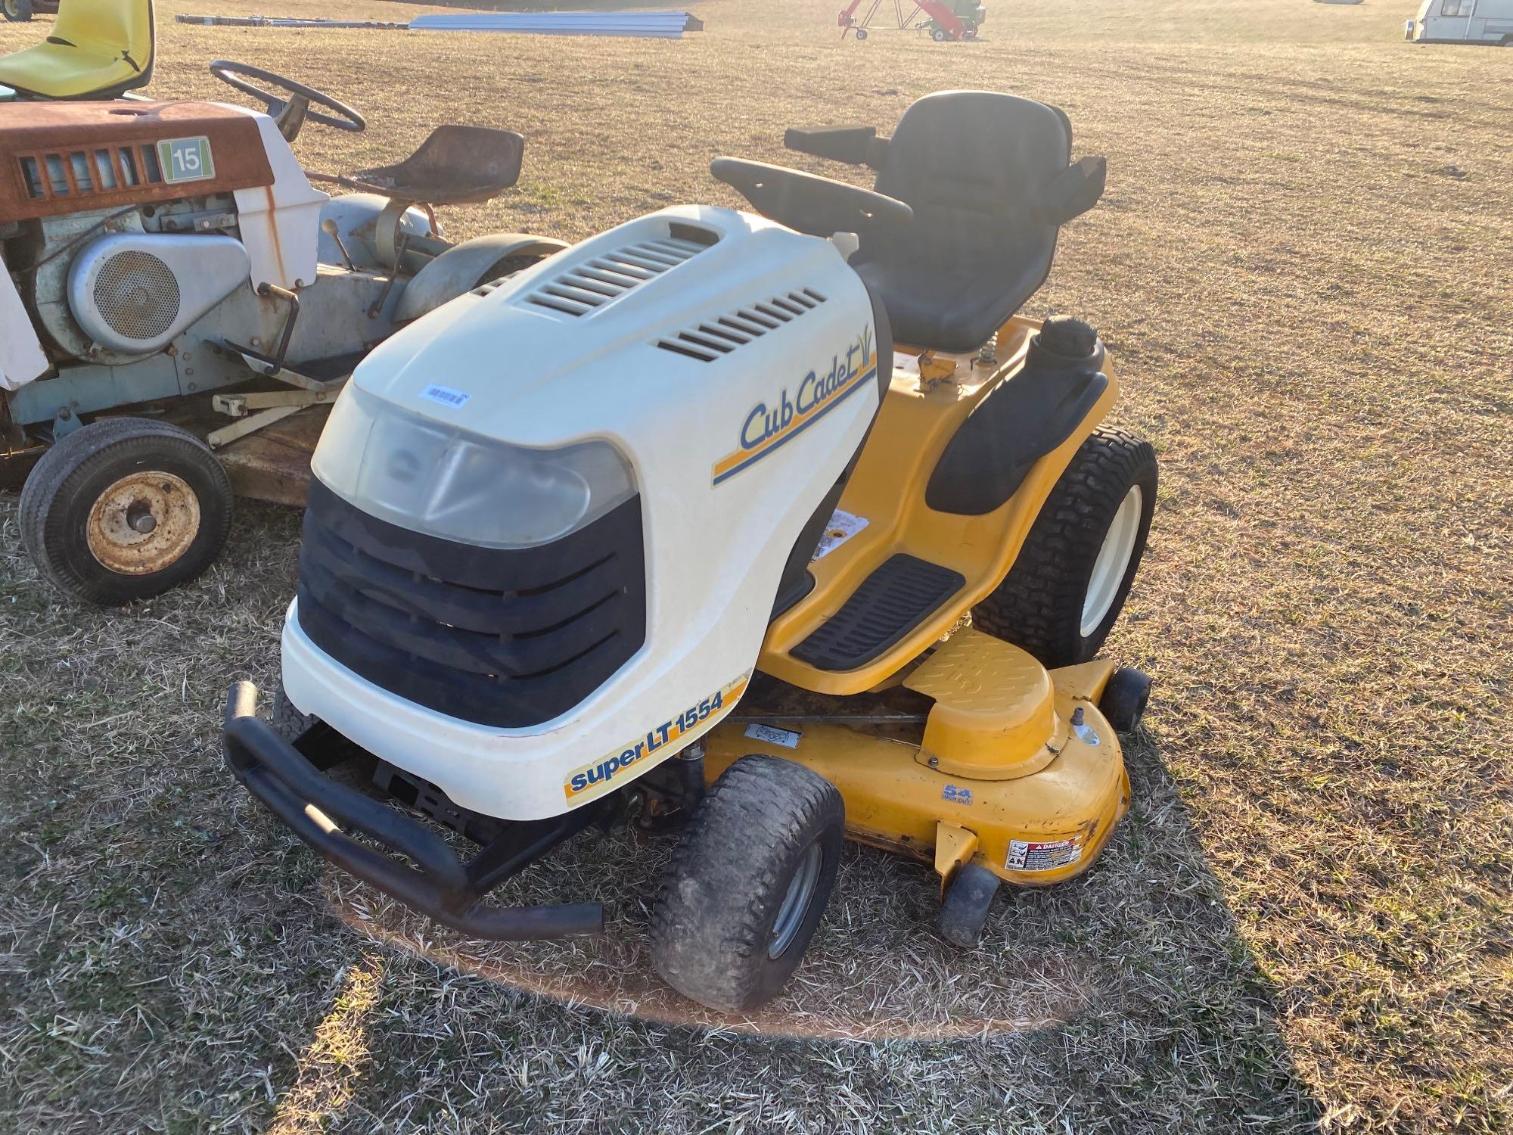 Image for Cub Cadet Super LT 1554 - 54 Inch Lawn Tractor - Does Not Run